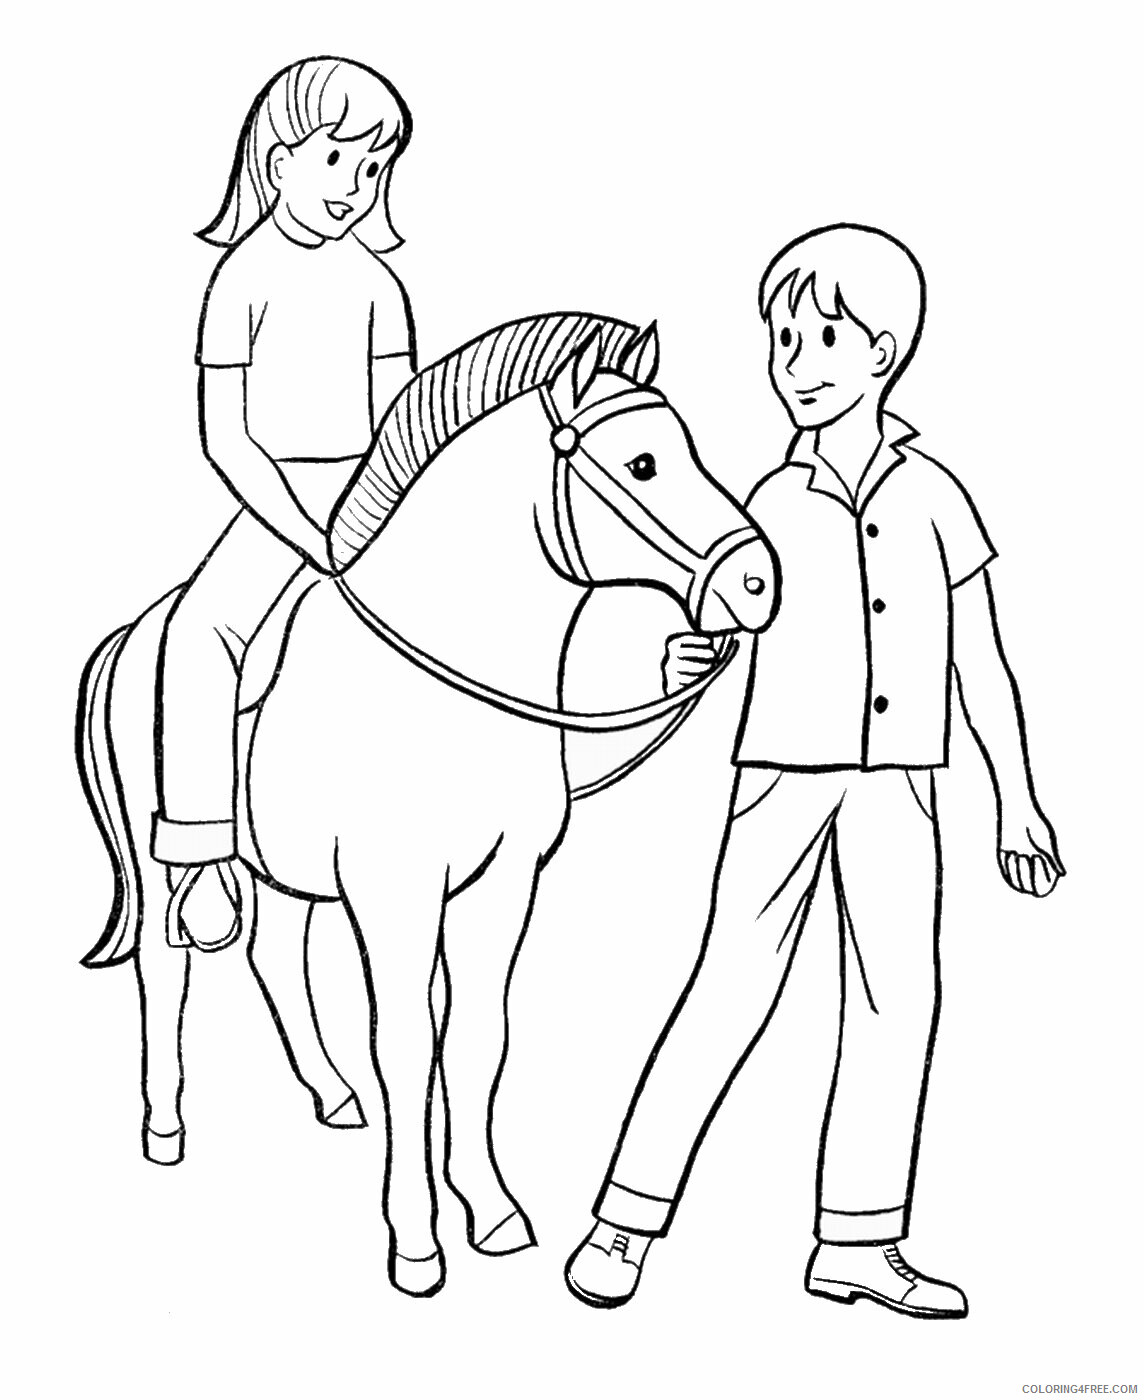 Horses Coloring Pages Animal Printable Sheets horses_cl_10 2021 2783 Coloring4free